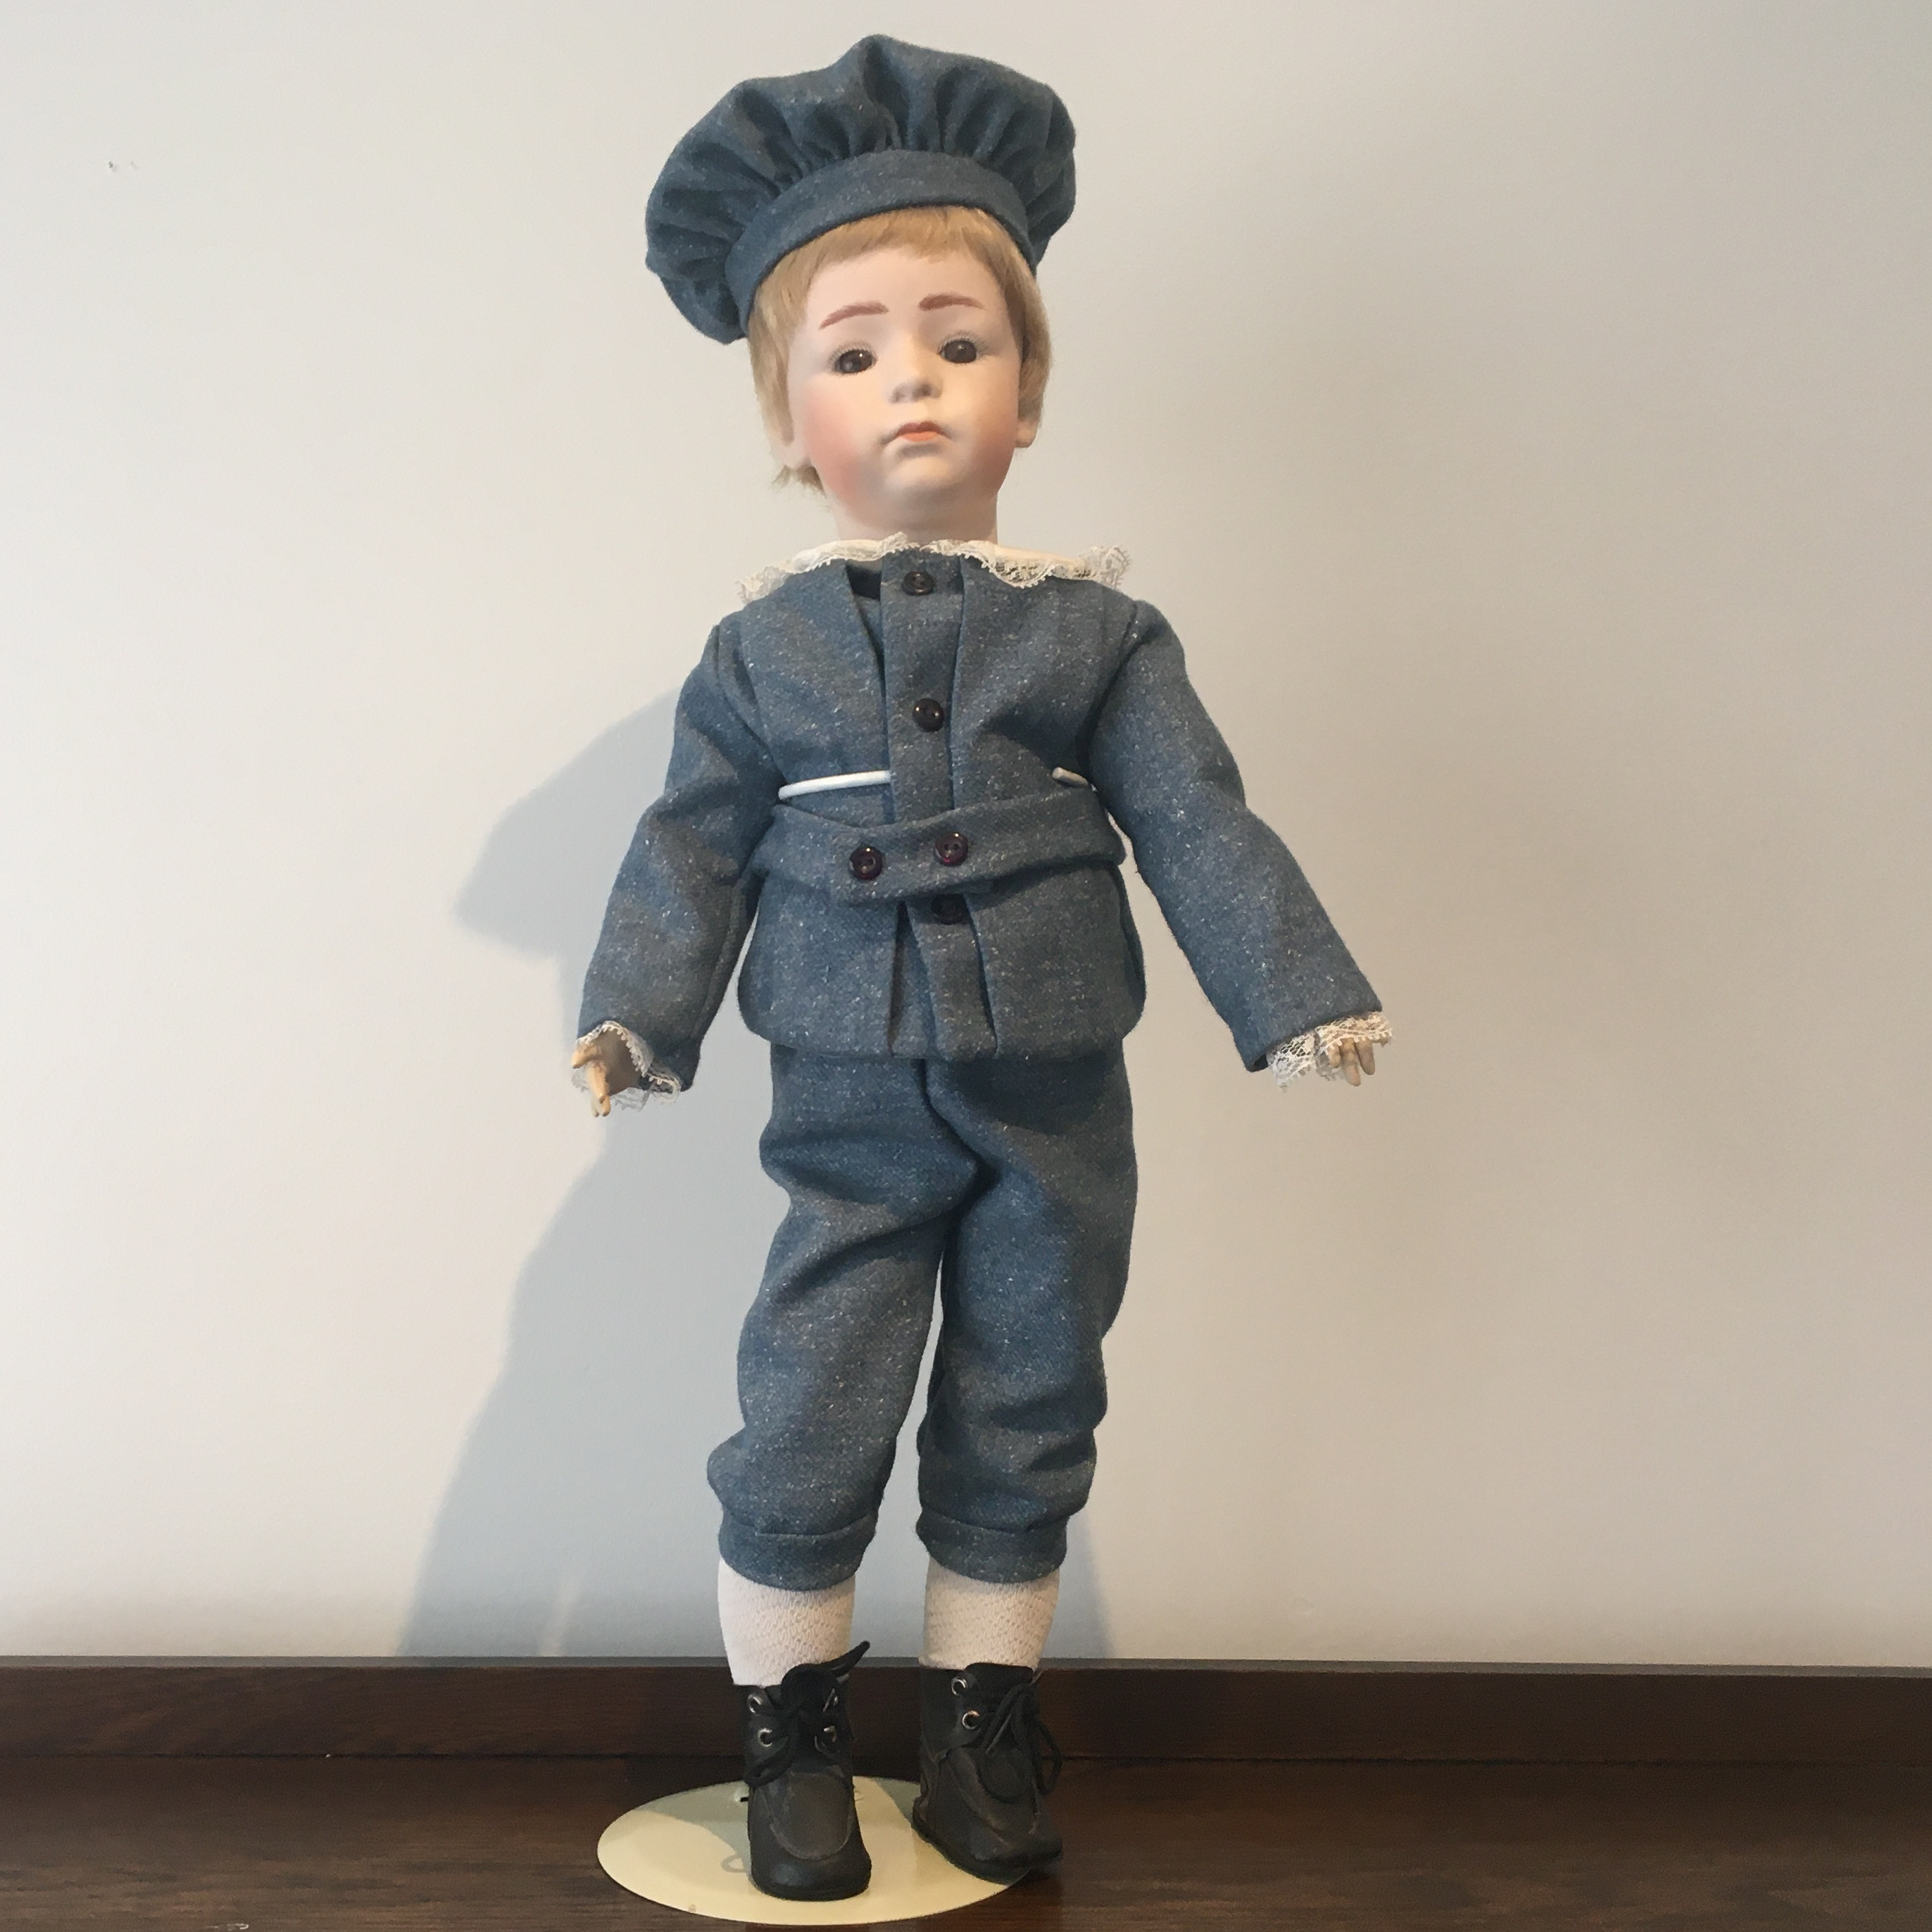 26-inch modern boy doll with short blond hair and a blue tweed suit and hat